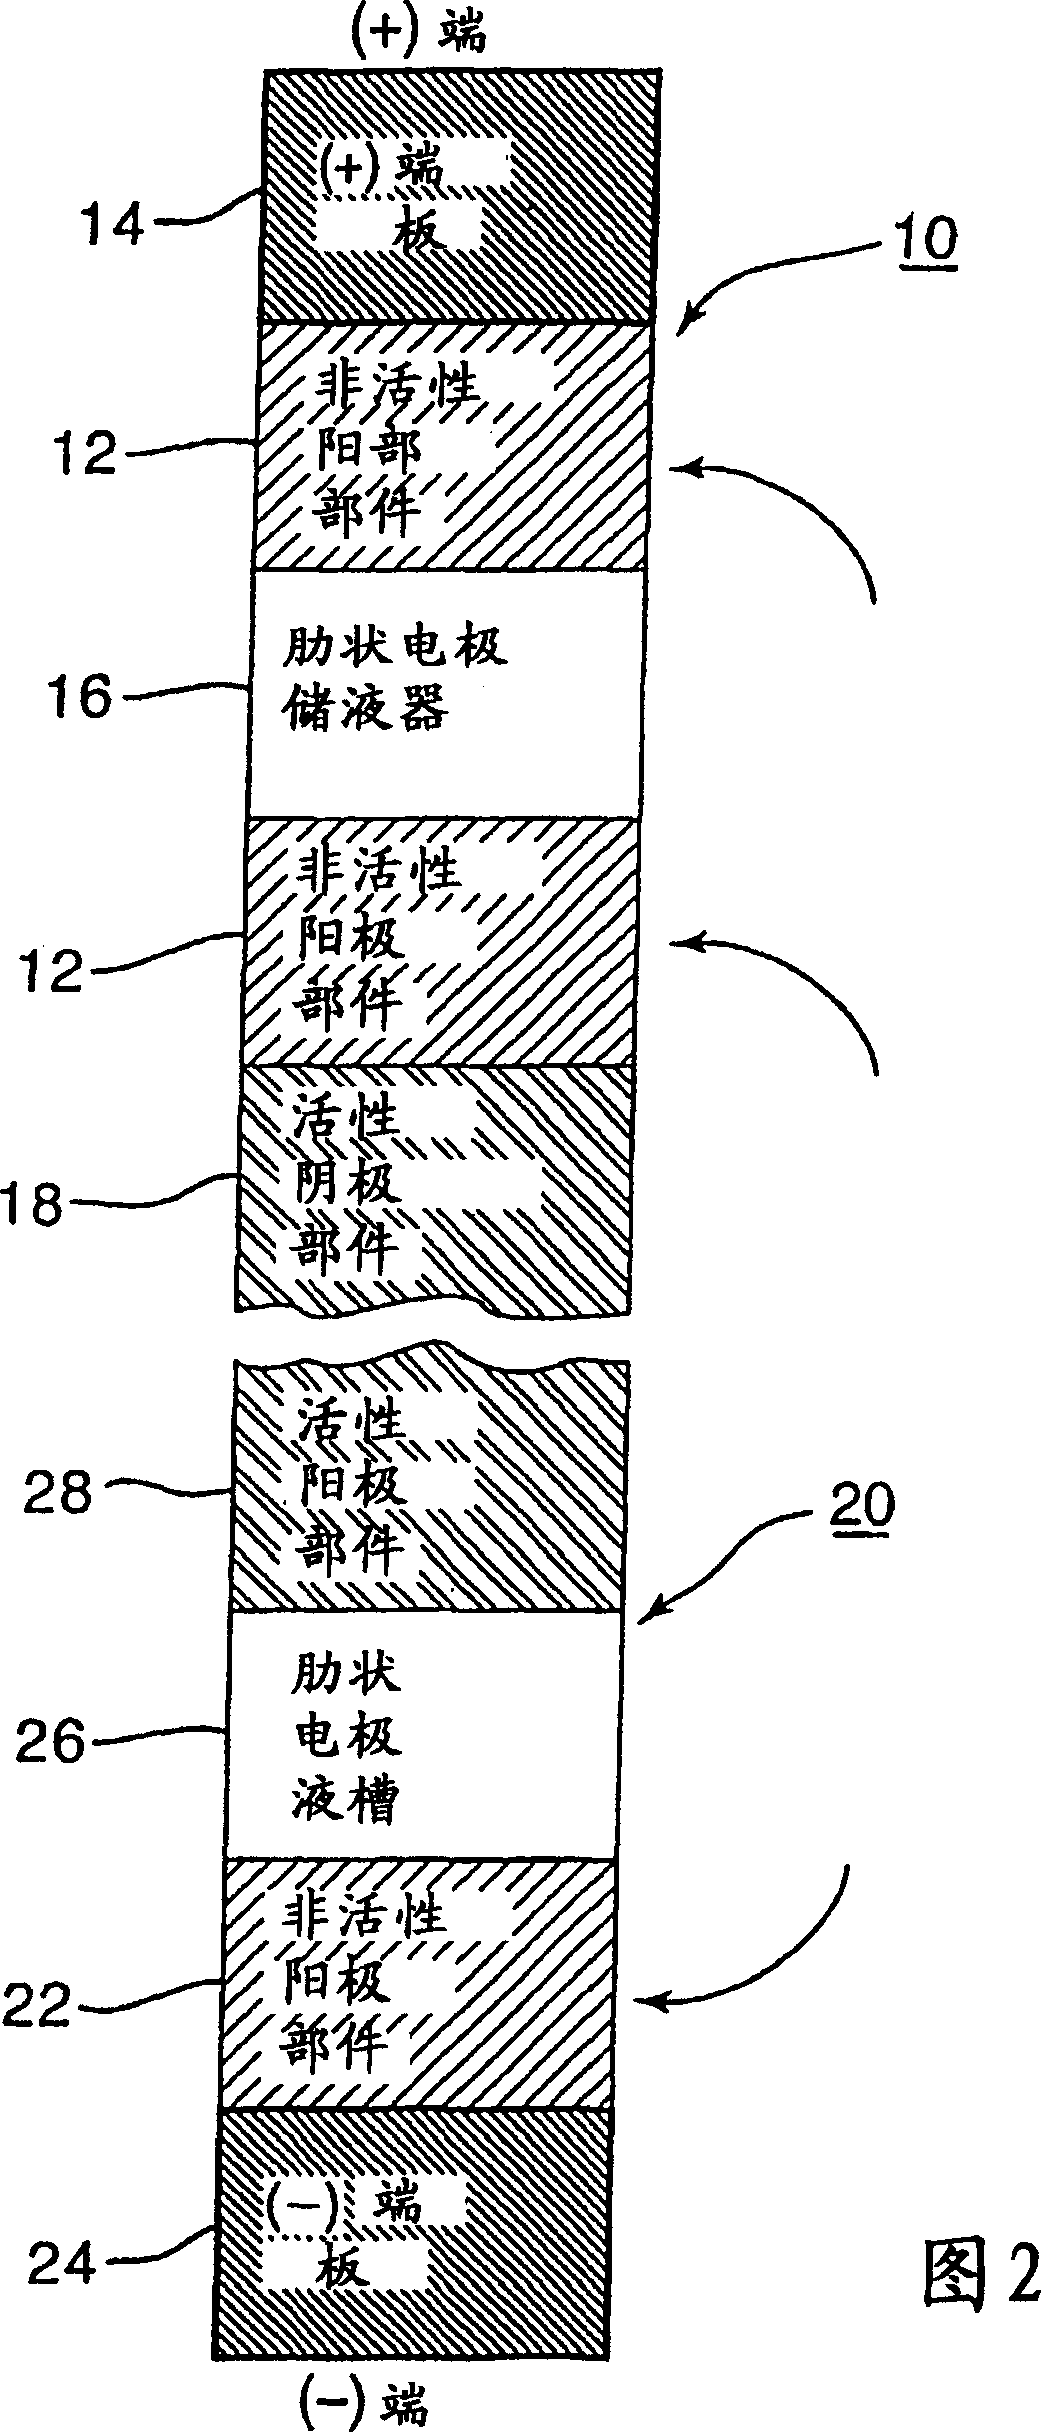 Inactive end cell assembly for fuel cells for improved electrolyte management and electrical contact